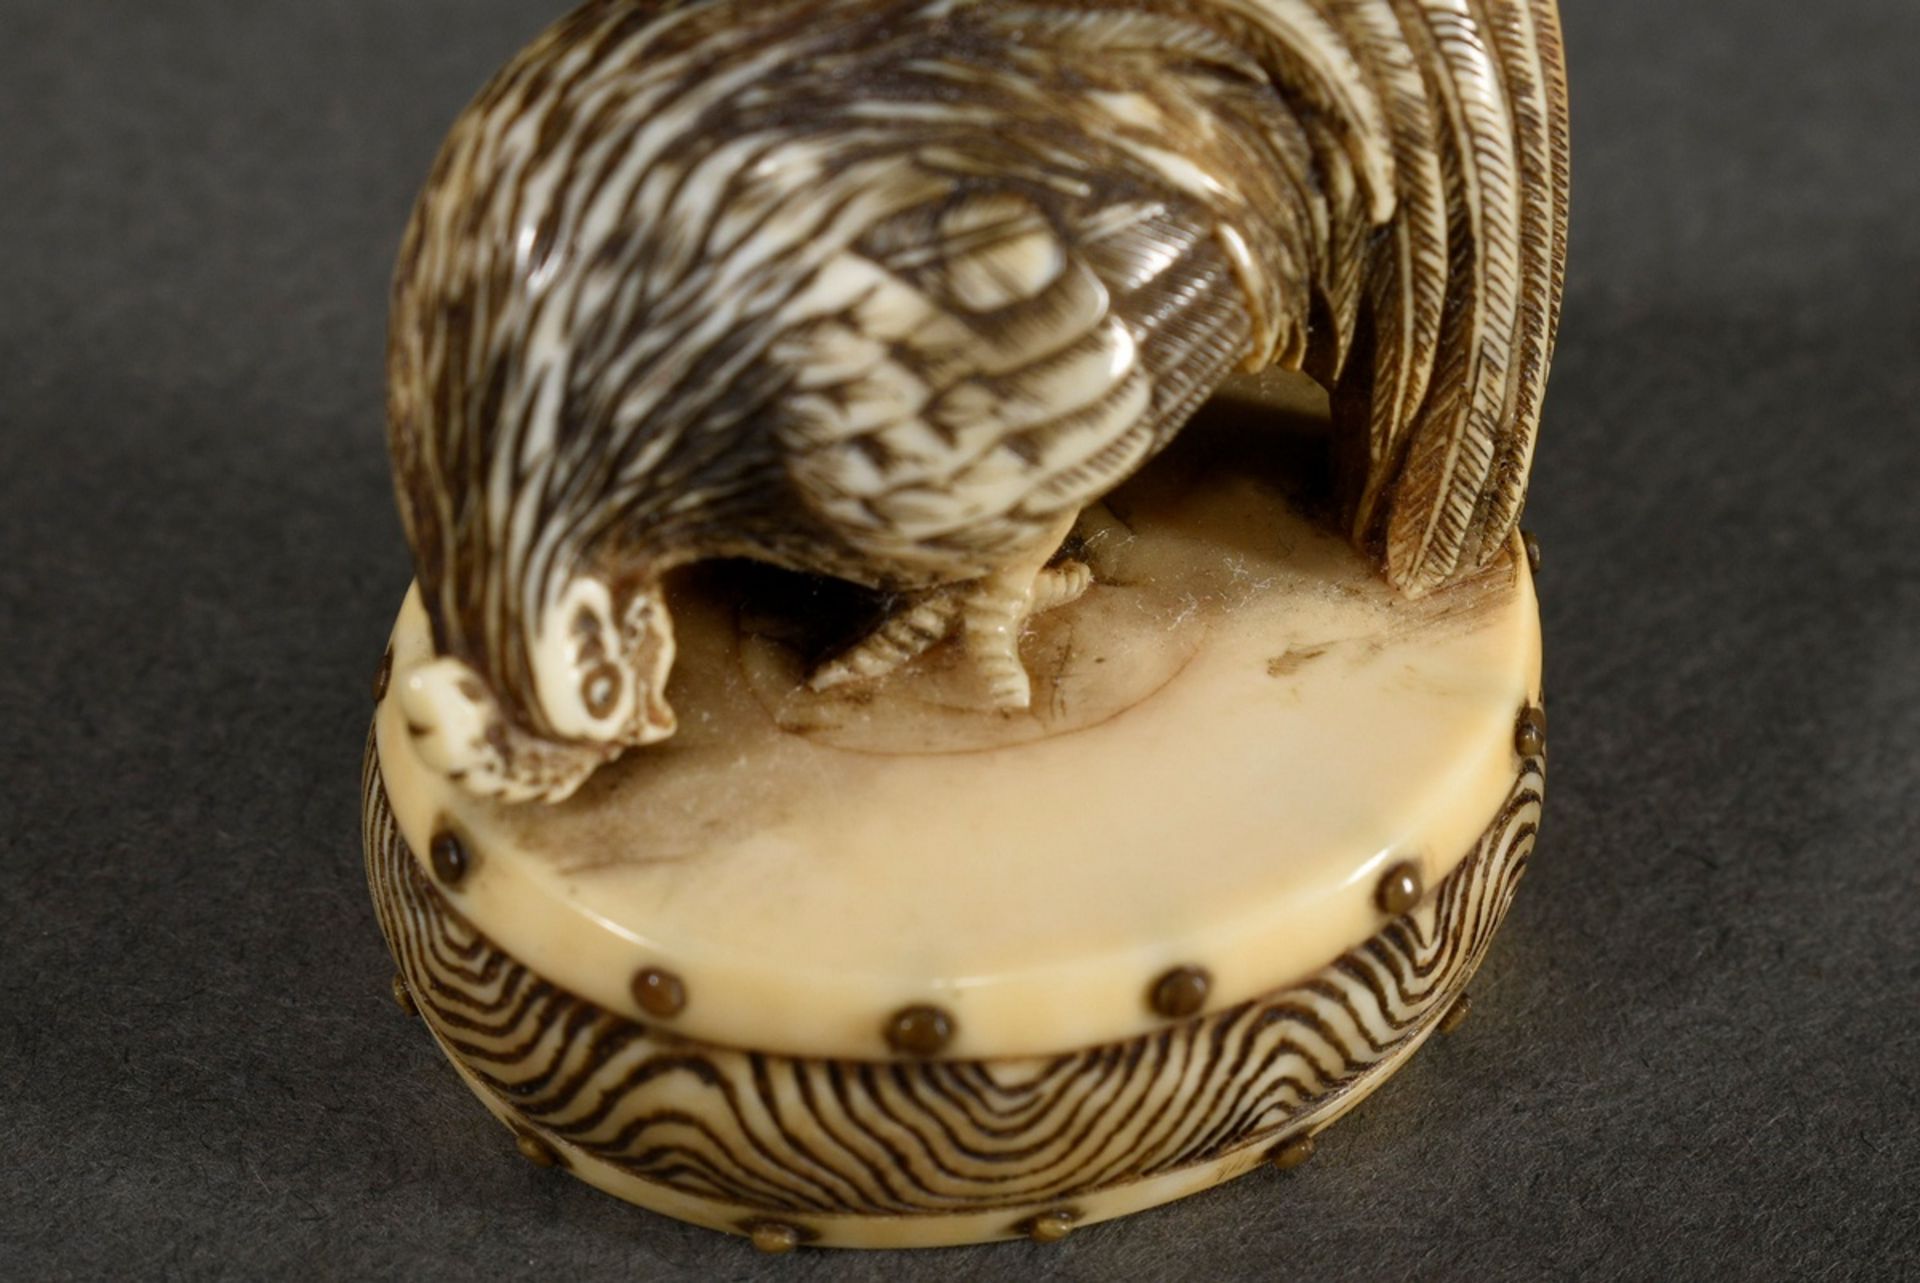 Ivory netsuke "cock on drum" with drum buttons of black horn, beautiful patina of use, around 1850, - Image 5 of 6